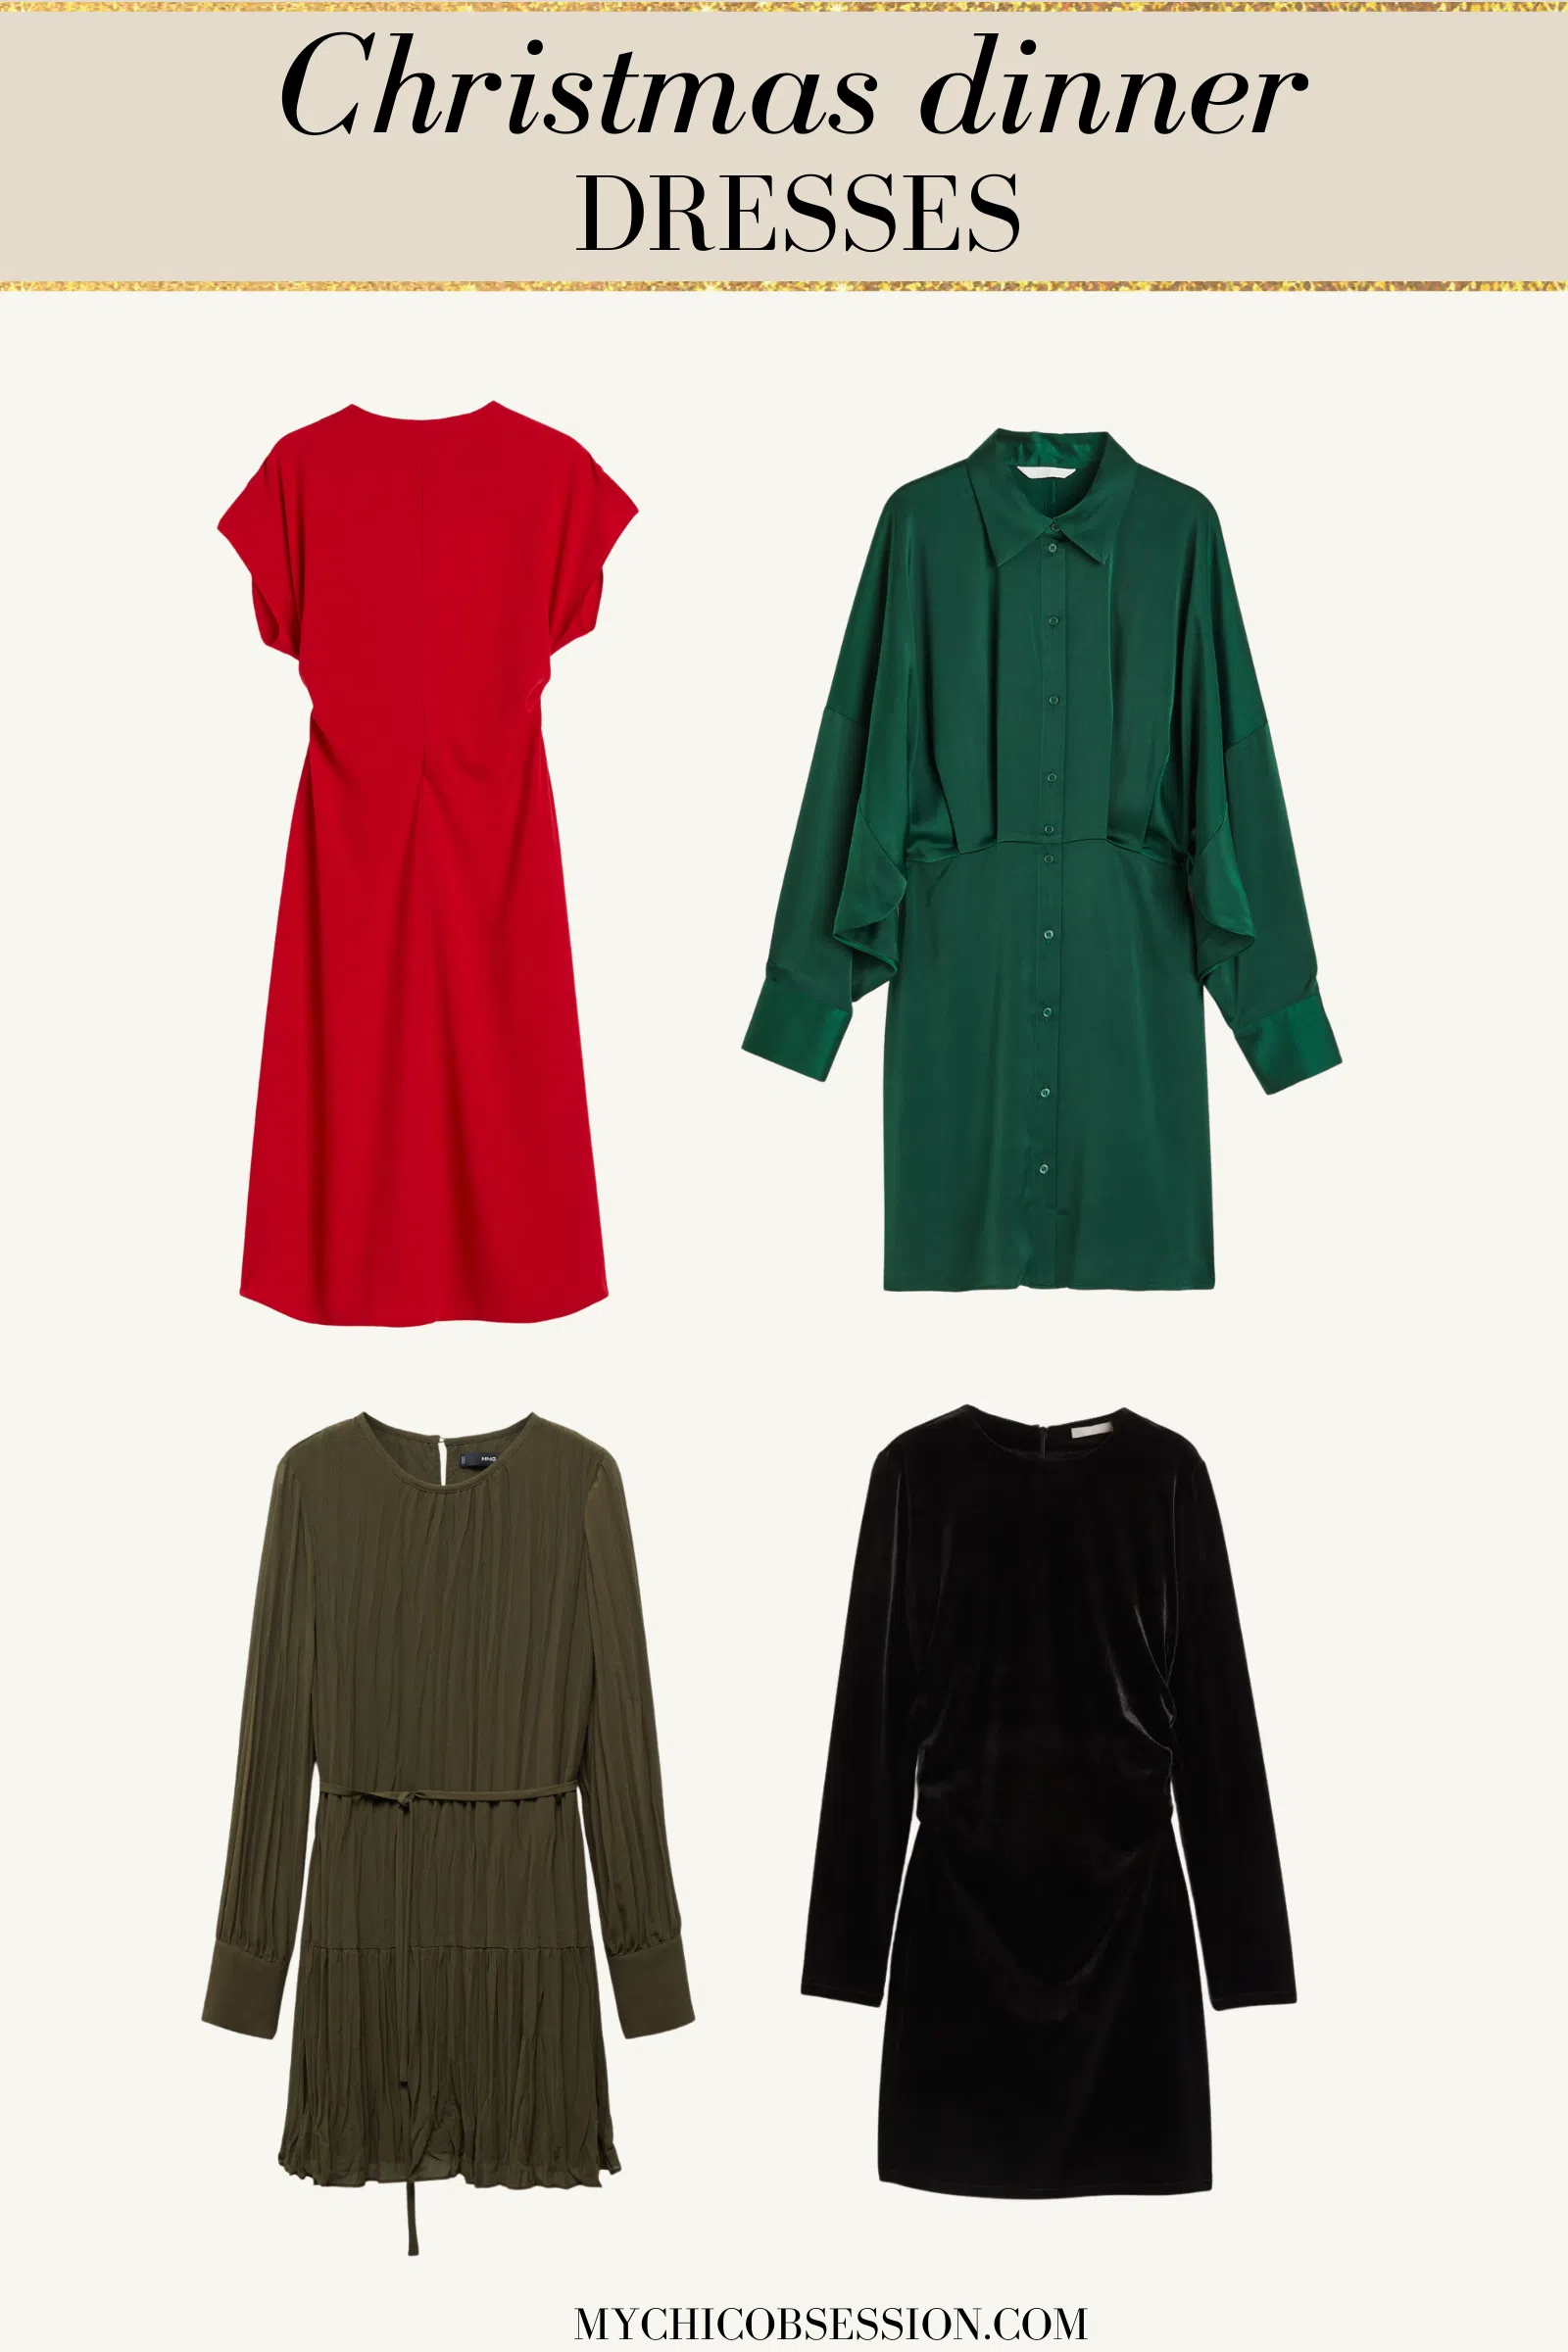 The Best Christmas Party Dresses - for the Office Party